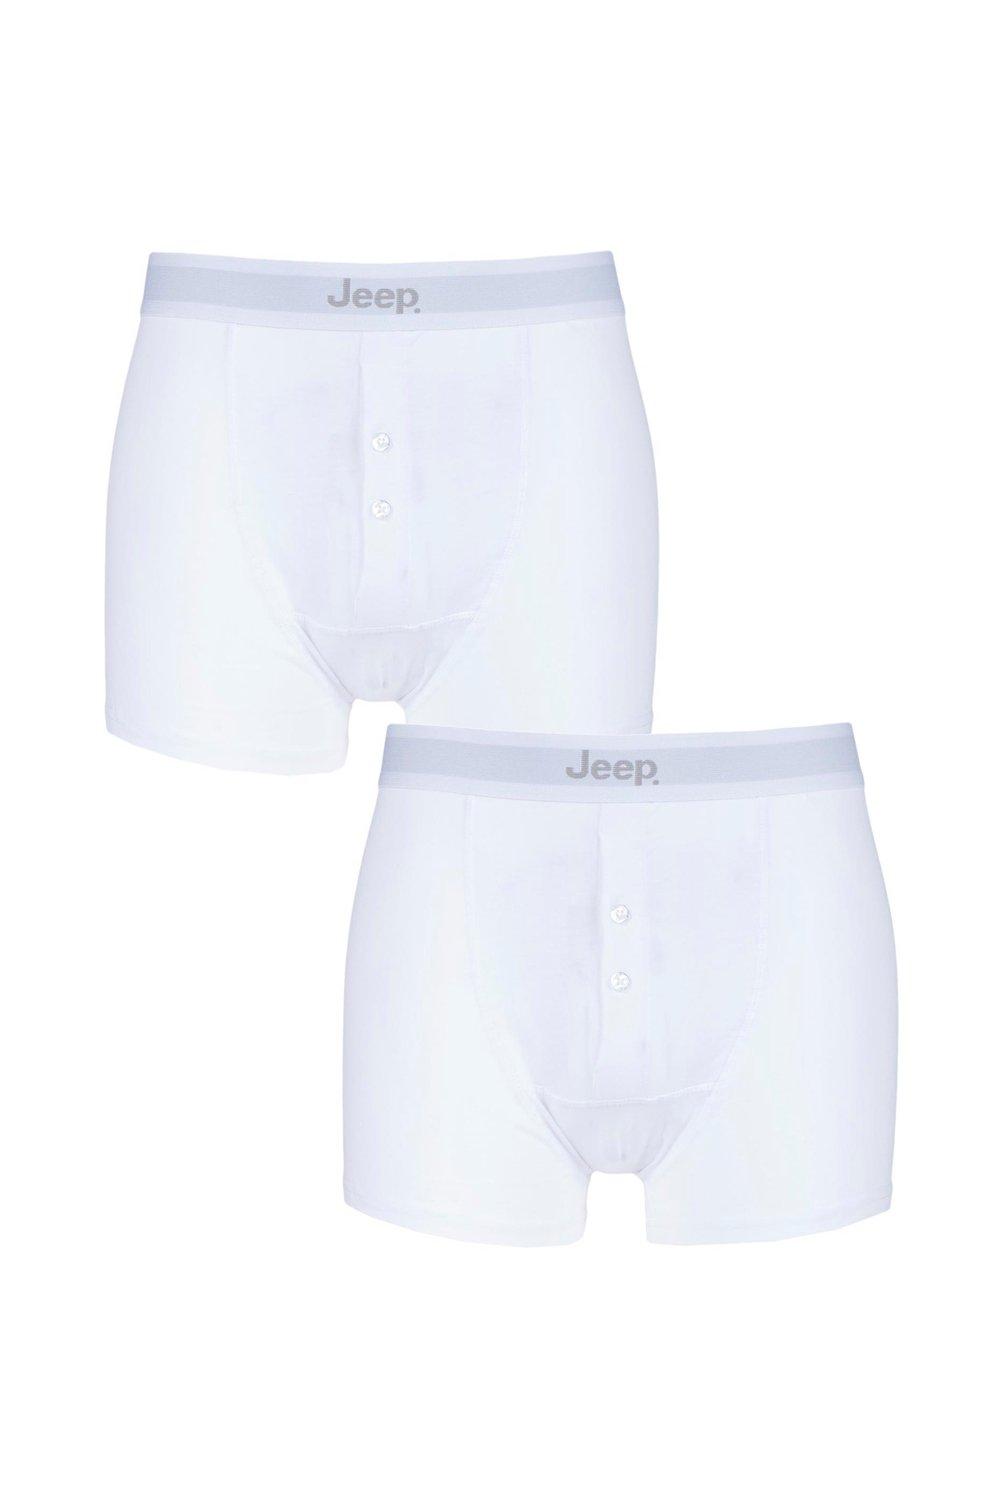 2 Pack Cotton Plain Fitted Button Front Trunk Boxer Shorts